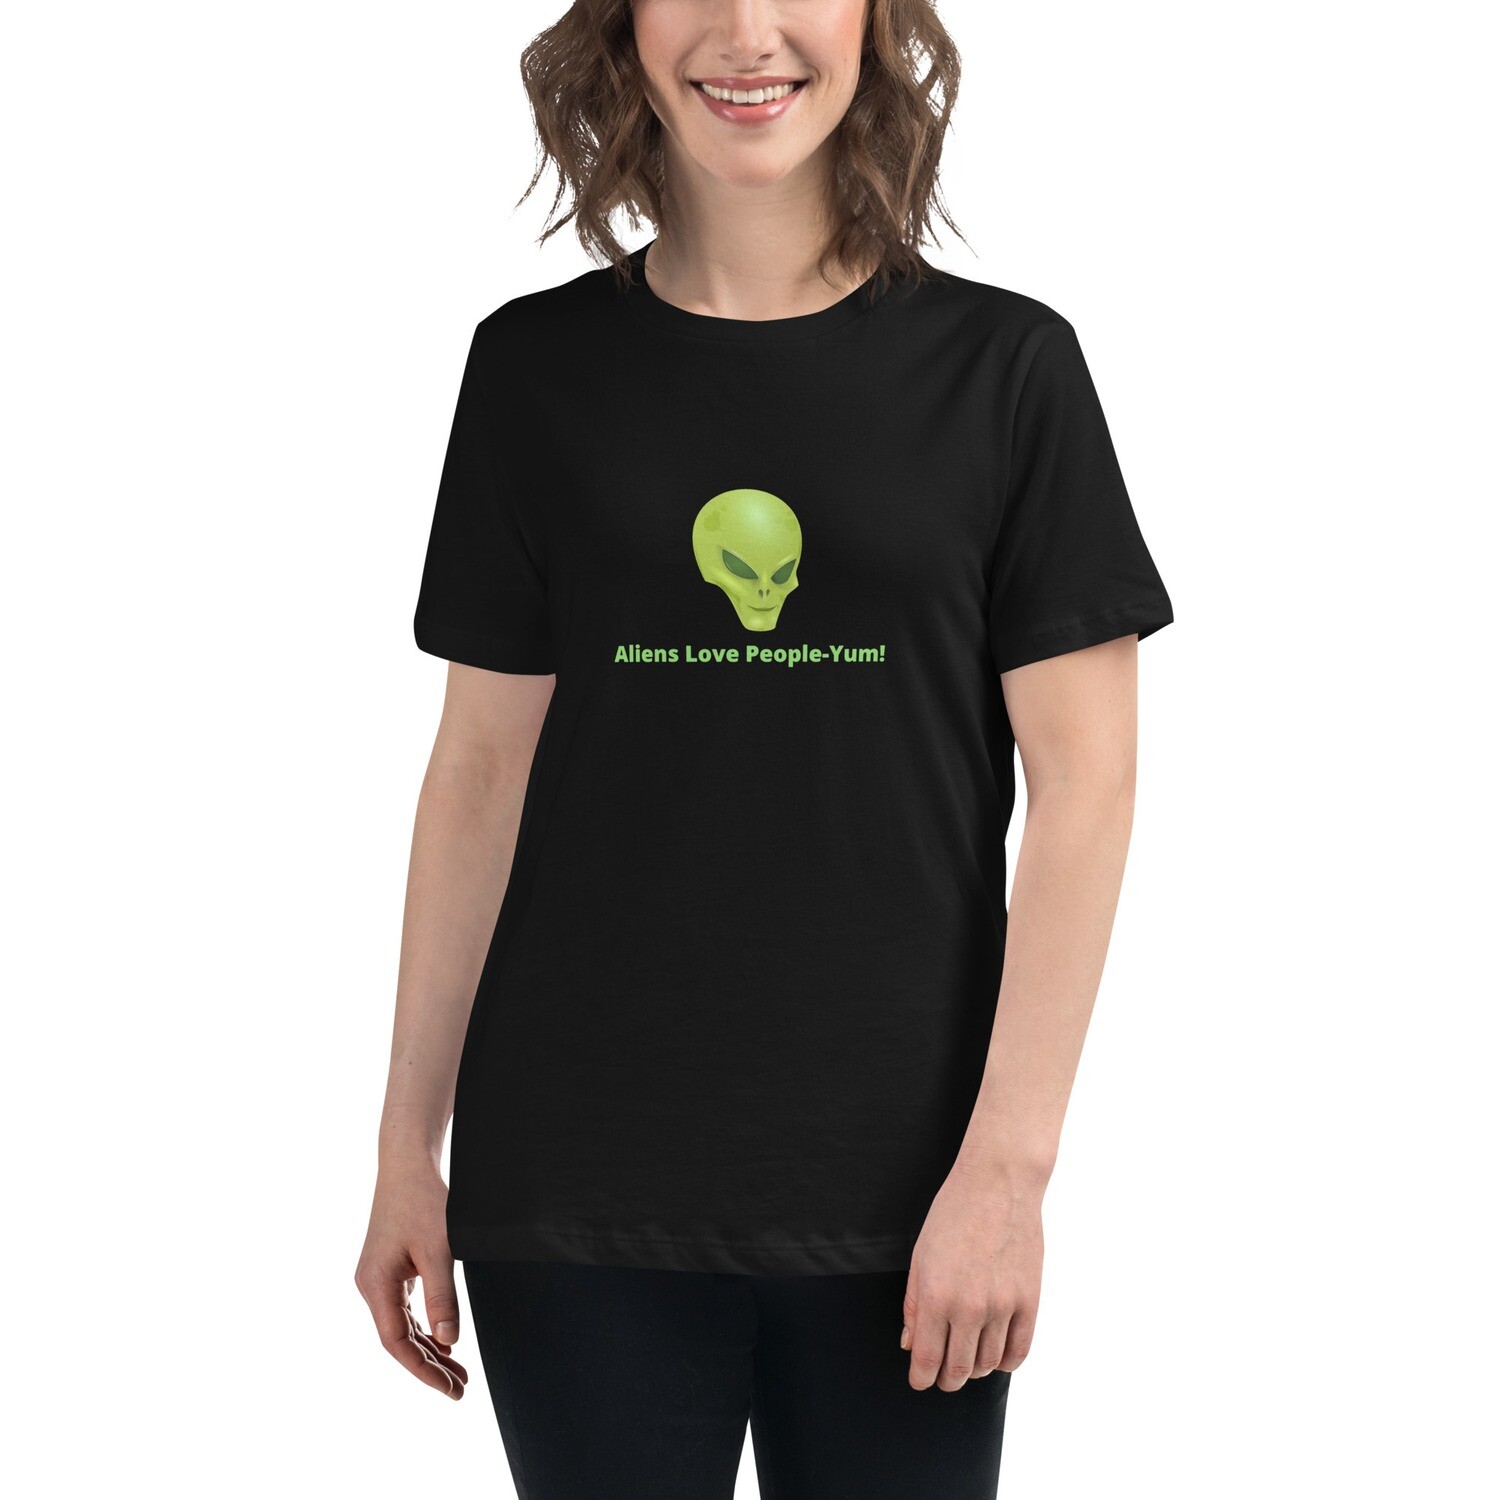 Aliens Love People - Yum - Women's Relaxed T-Shirt